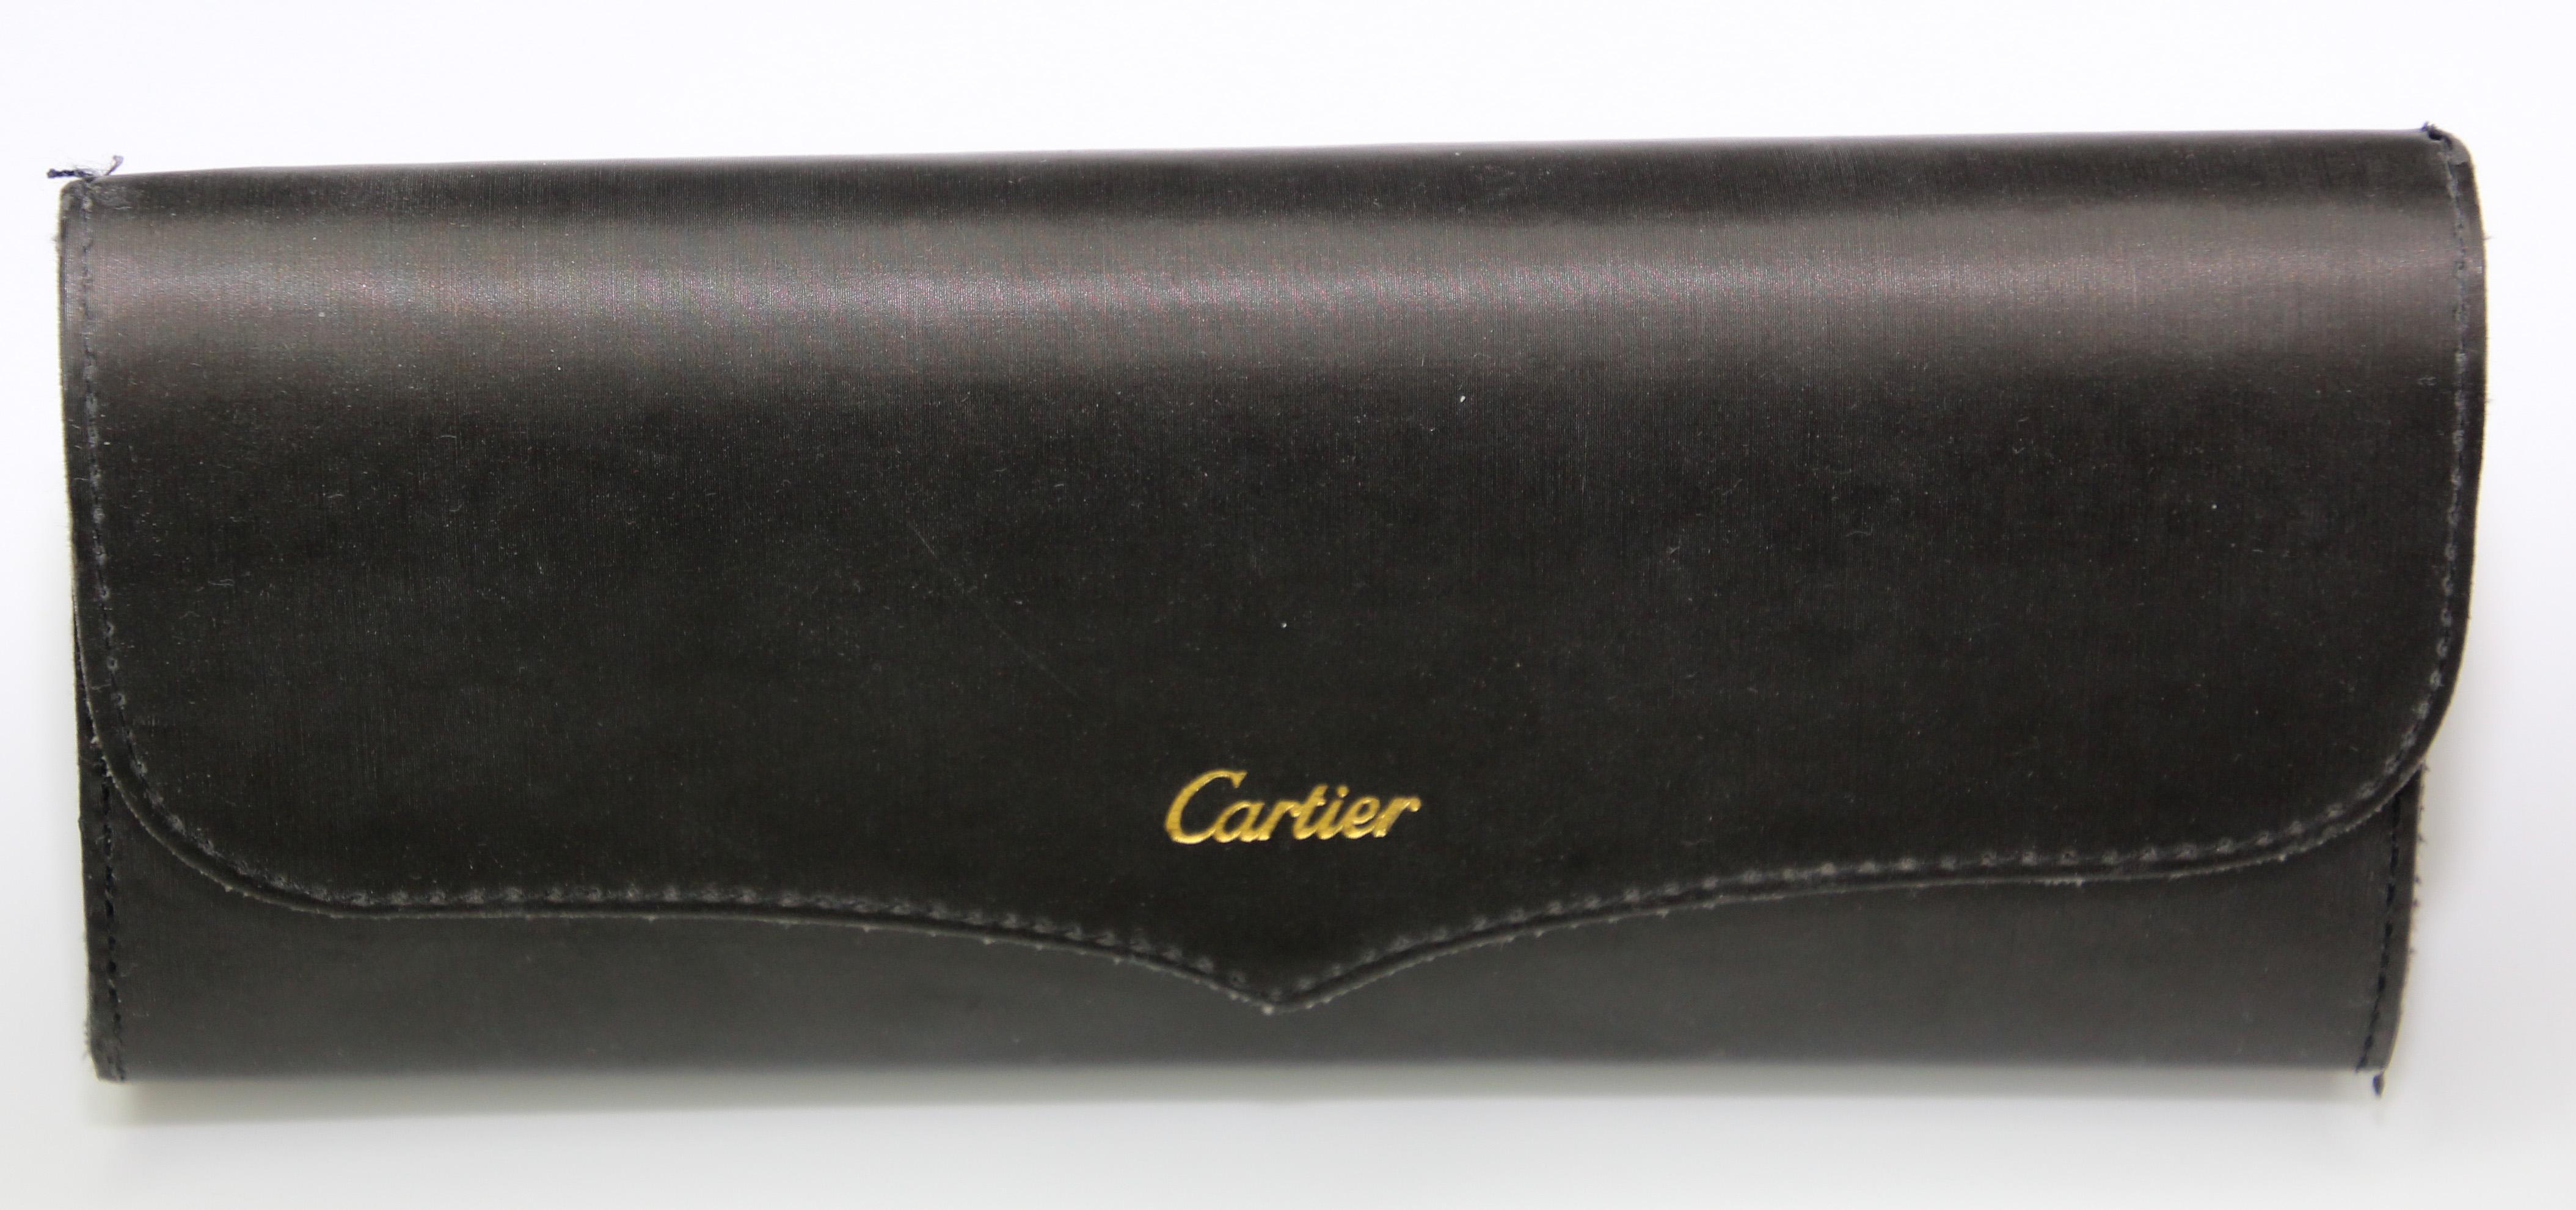 Vintage Cartier classic black sunglasses with silver CC logo.
Classic, timeless, sophisticated piece to add to your wardrobe
Authentic, vintage, rare, Cartier Paris France Black Jackie O. Sunglasses
Original 1990s Cartier sunglasses features black